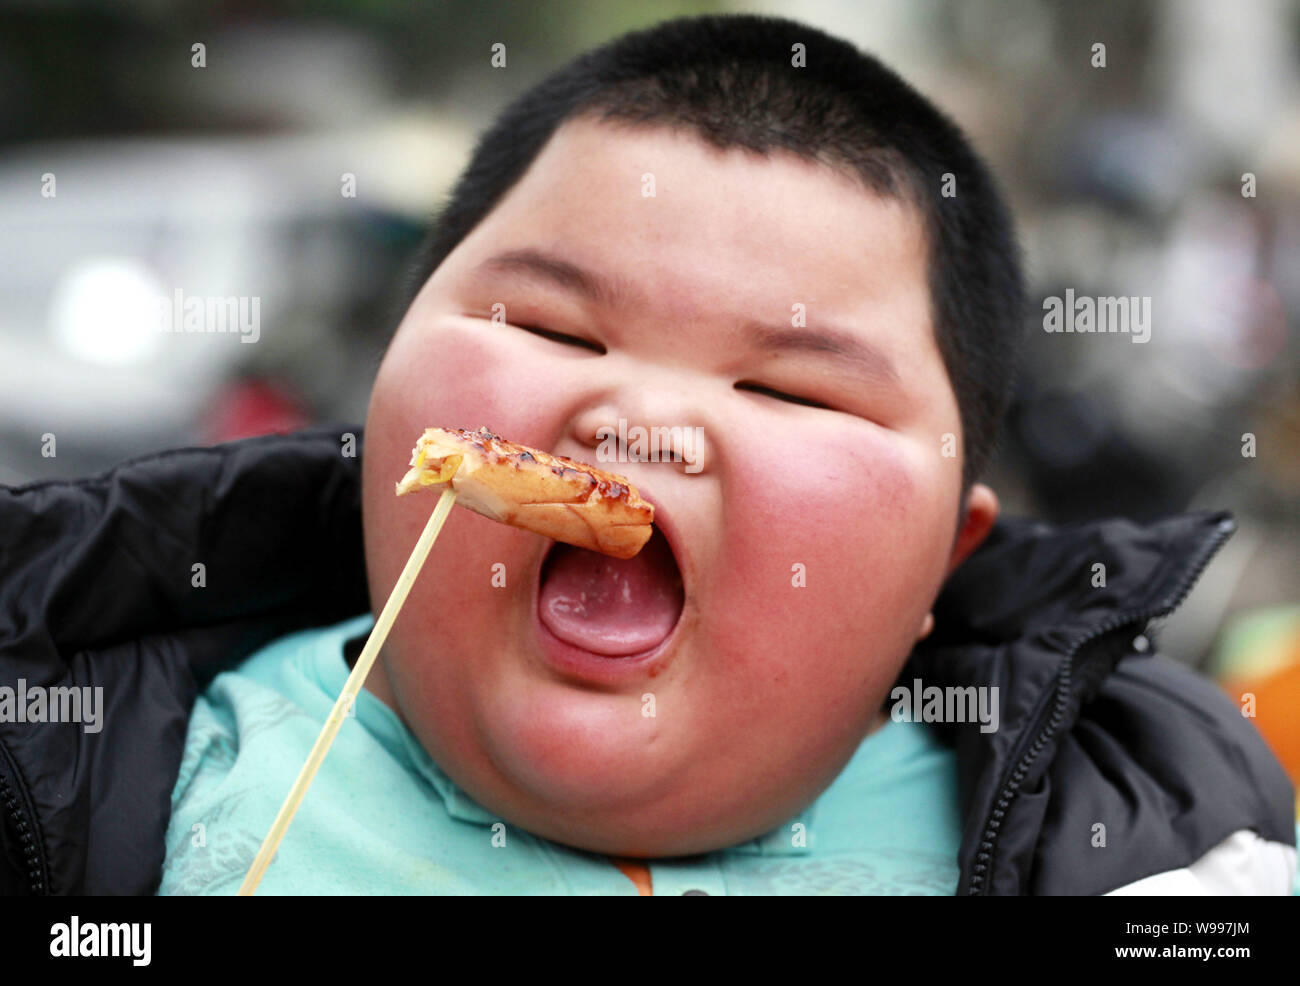 The fattest child, Lu Zhihao, eats BBQ food in Foshan, southeast Chinas Guangdong Province, 29 March 2011.   Lu Zhihao is an obese child hailing from Stock Photo